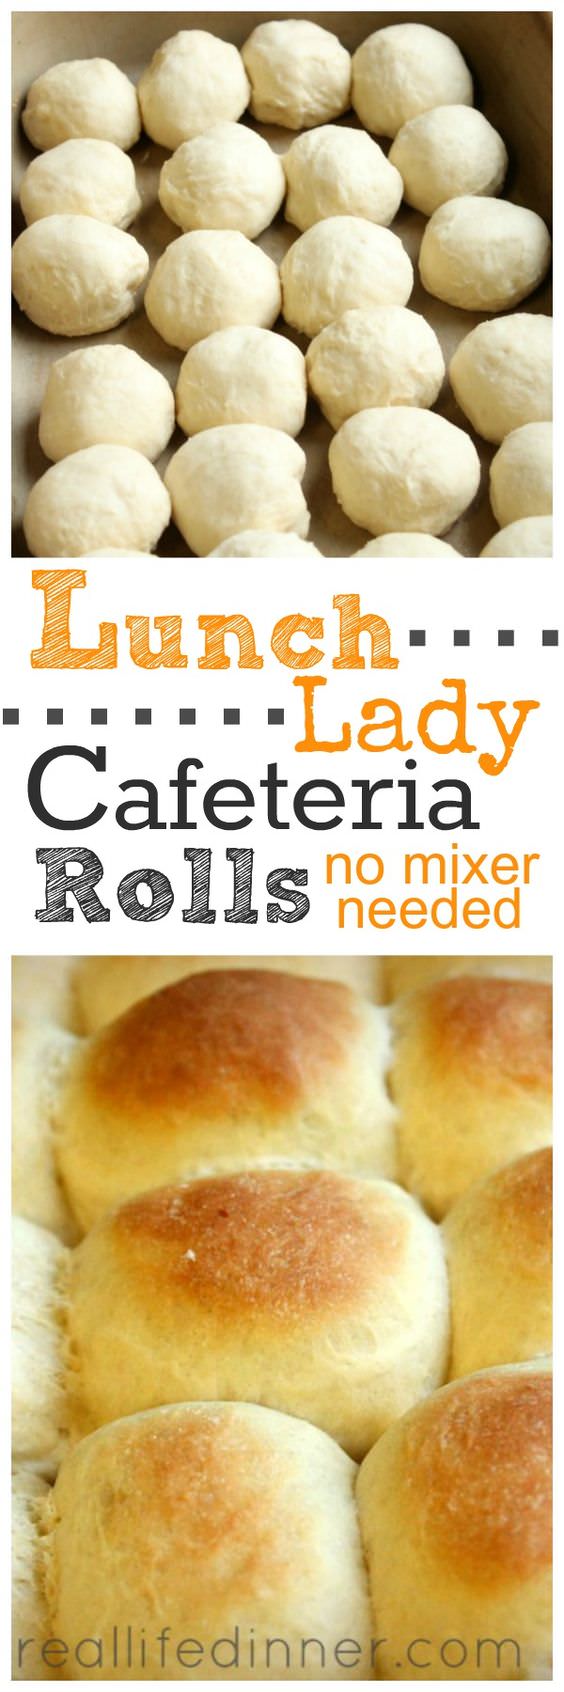 Make out the light textured rolls that might remind you of the ones in old school lunches. Check out!